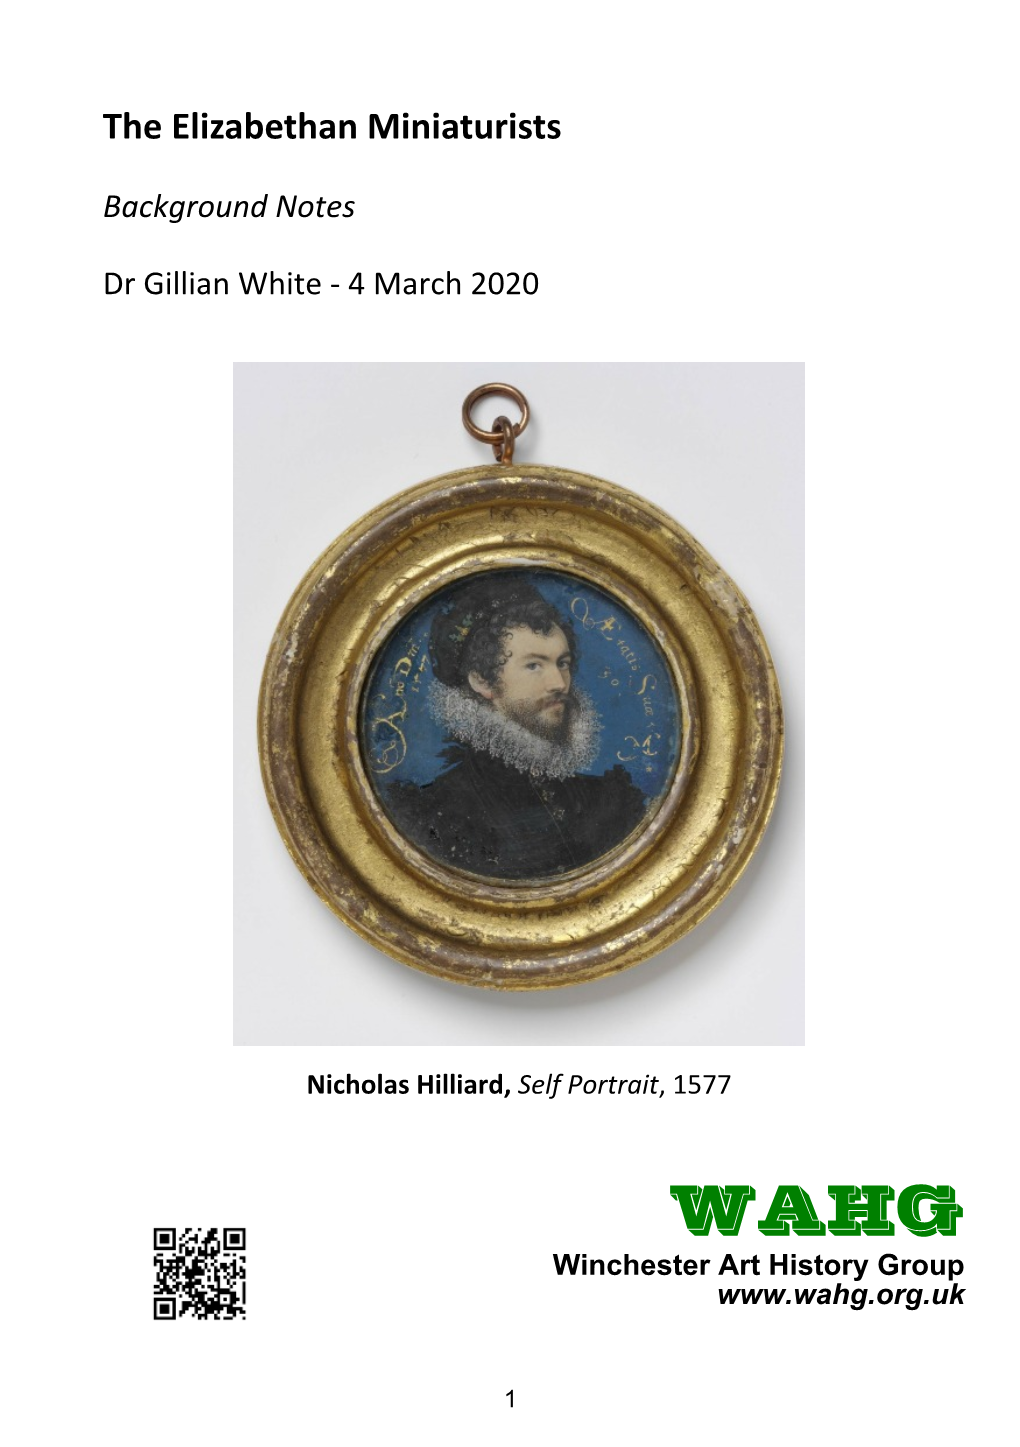 The Elizabethan Miniaturists Illustrated Seminar by Dr Gillian White